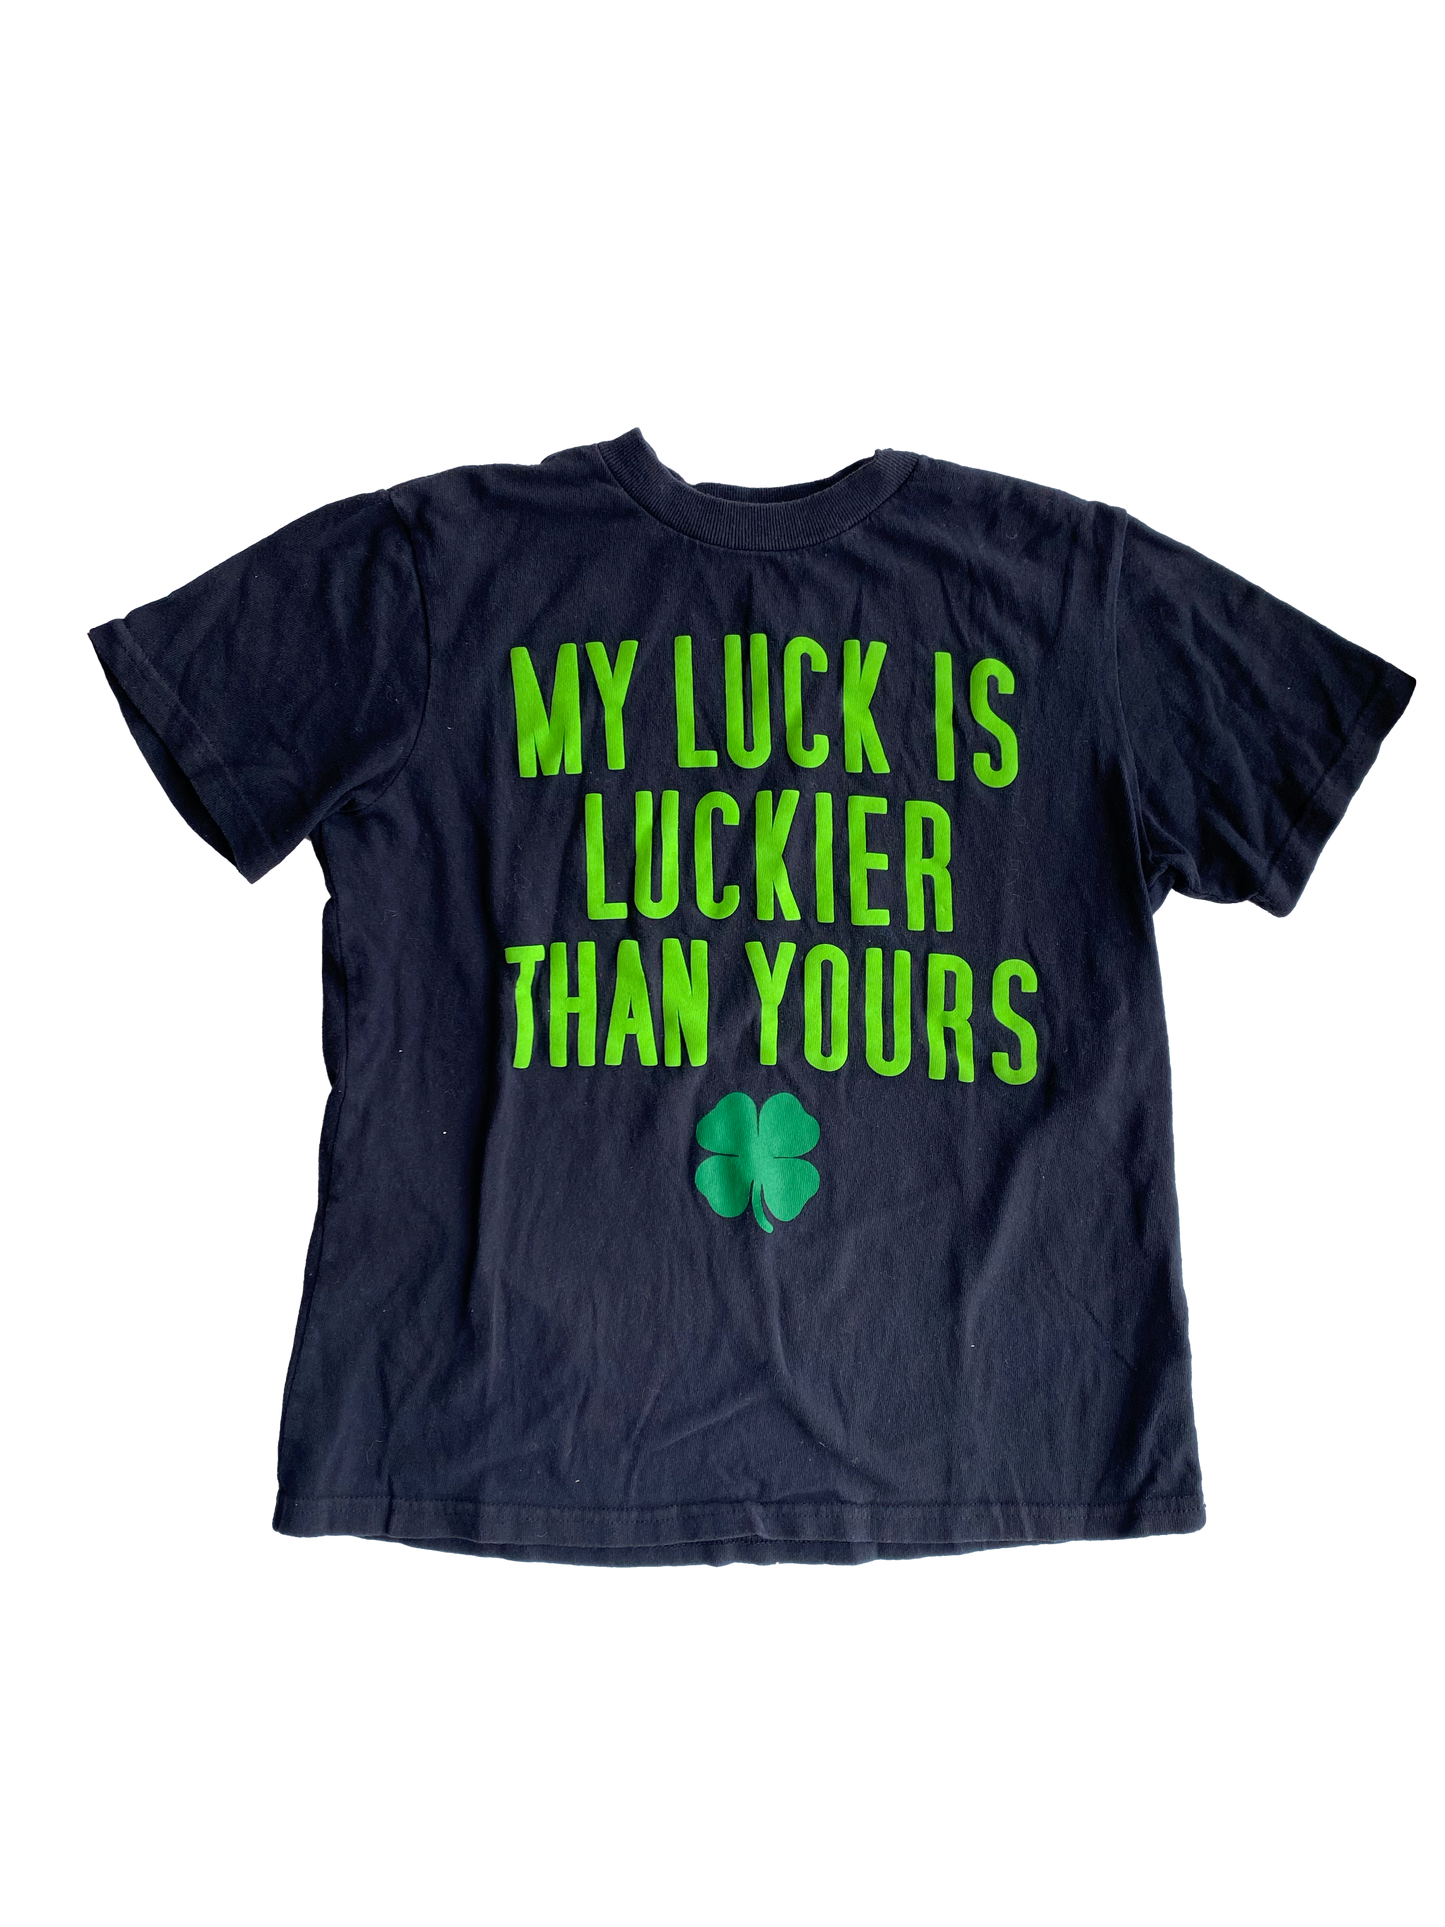 Aeropostale Black T-Shirt "My Luck is Luckier Than Yours" 10